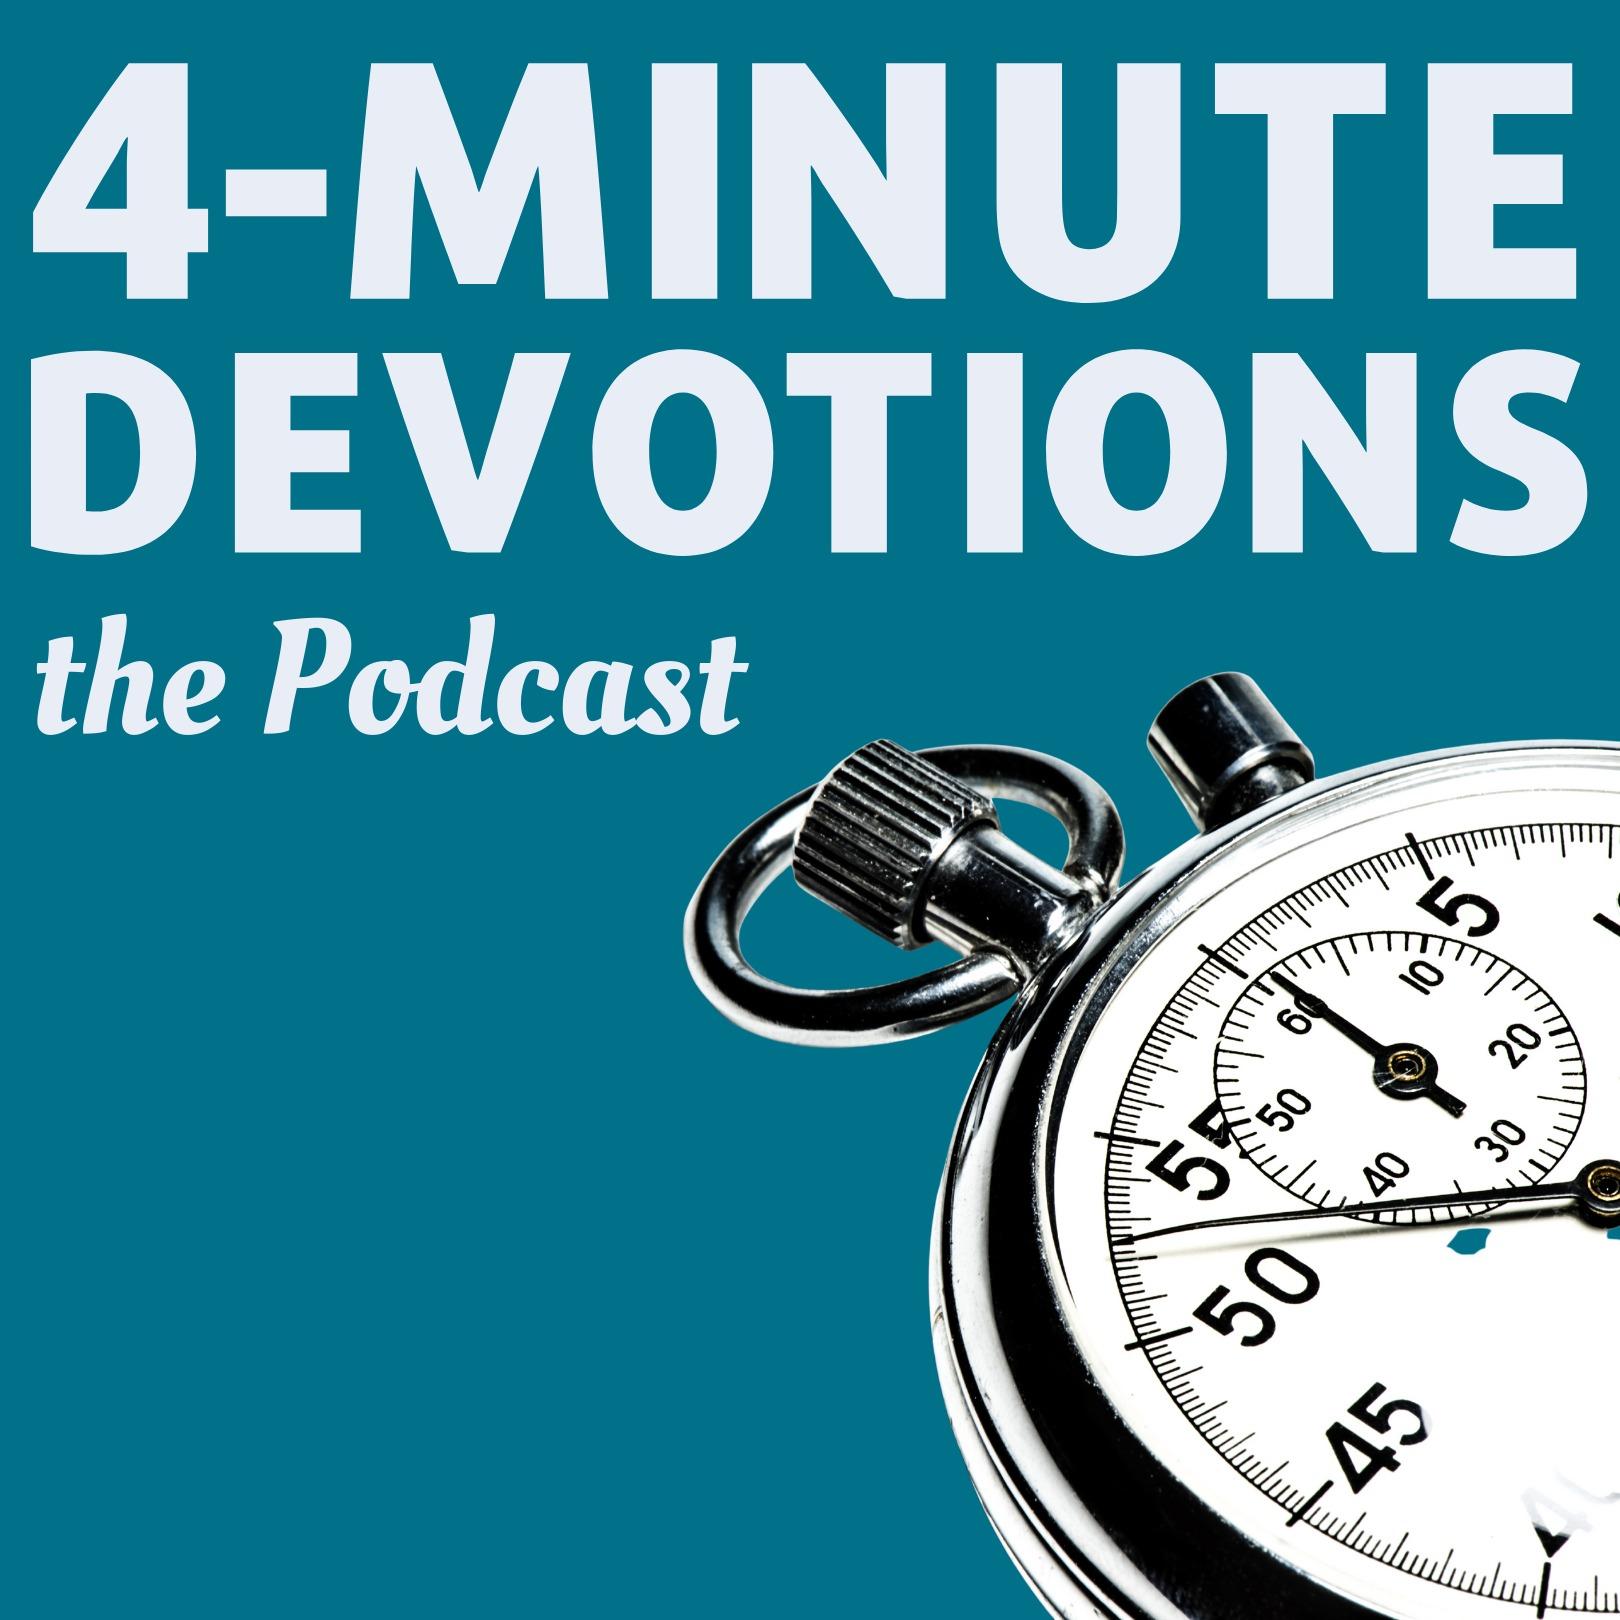 4-minute Devotions - the Podcast